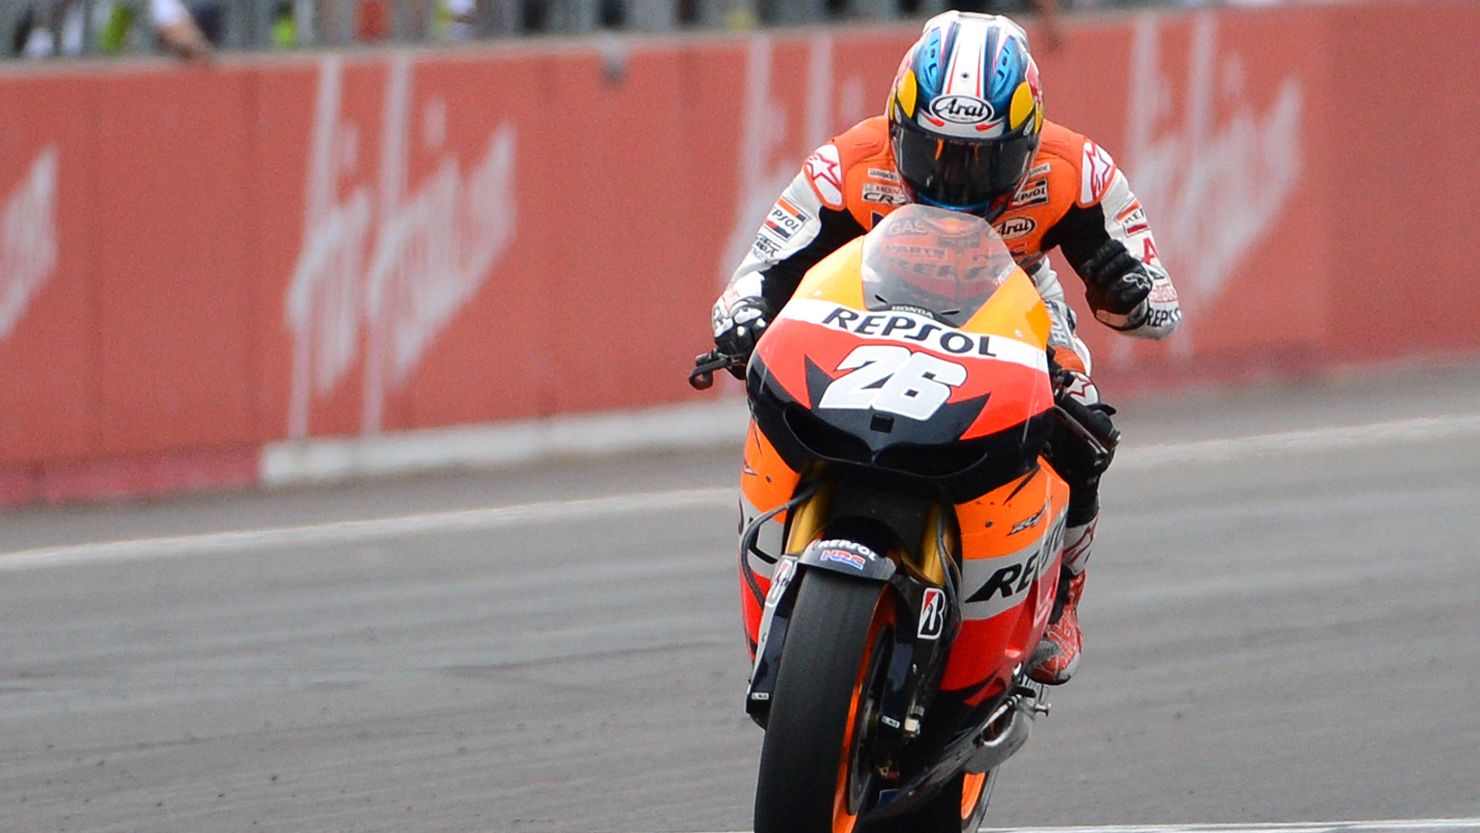 Dani Pedrosa clenches his fist after taking the checkered flag in the Japan MotoGP at Motegi.